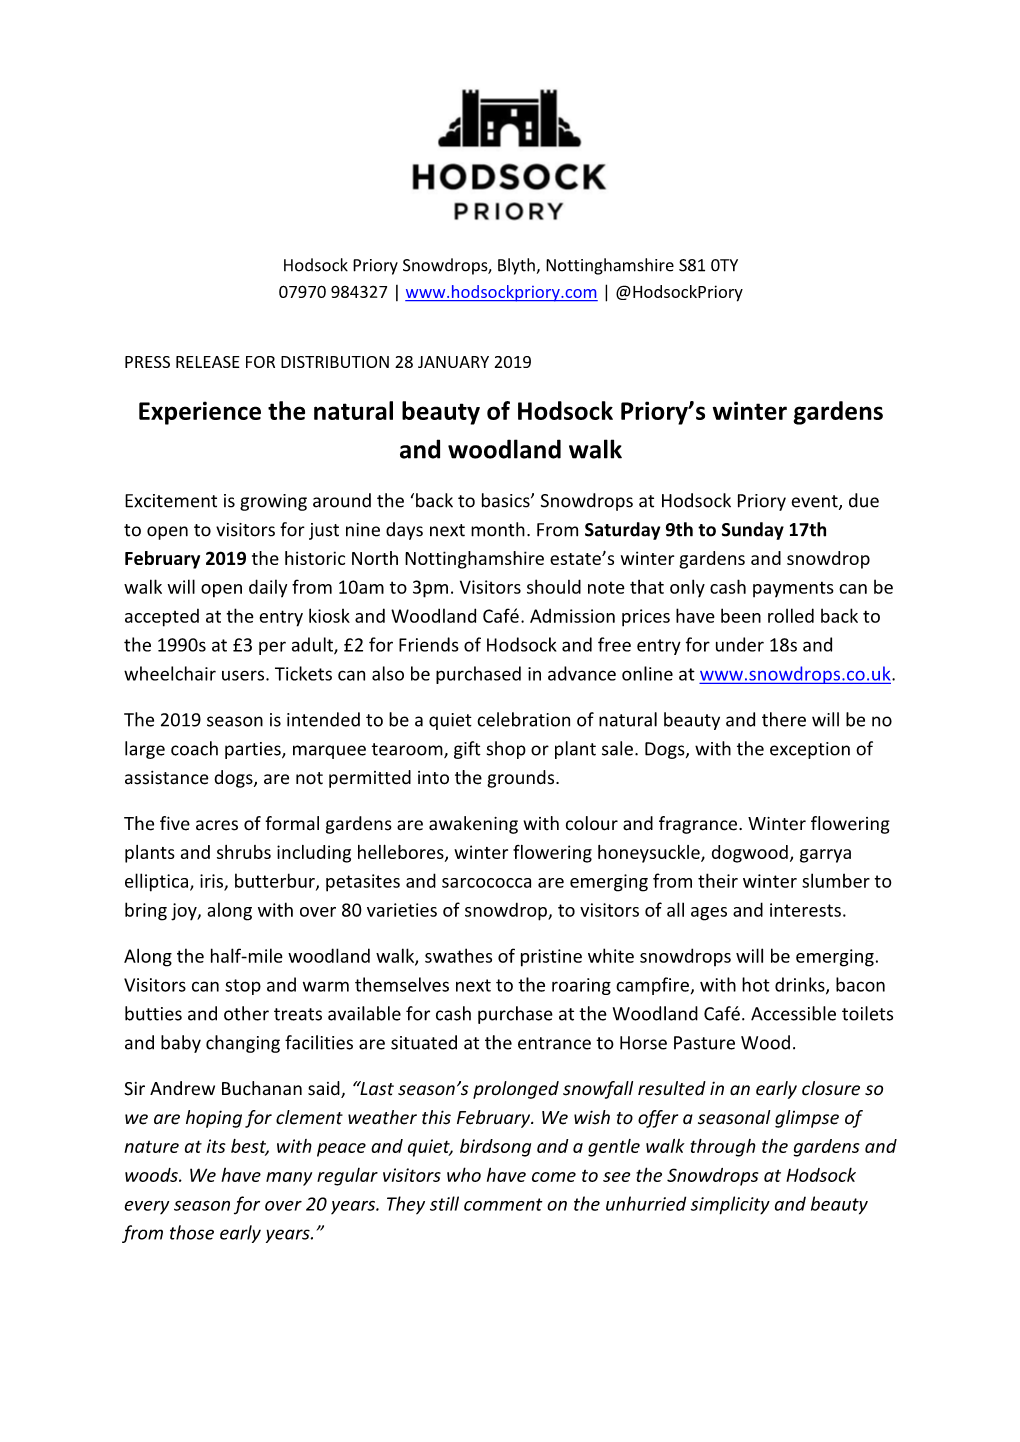 Experience the Natural Beauty of Hodsock Priory's Winter Gardens